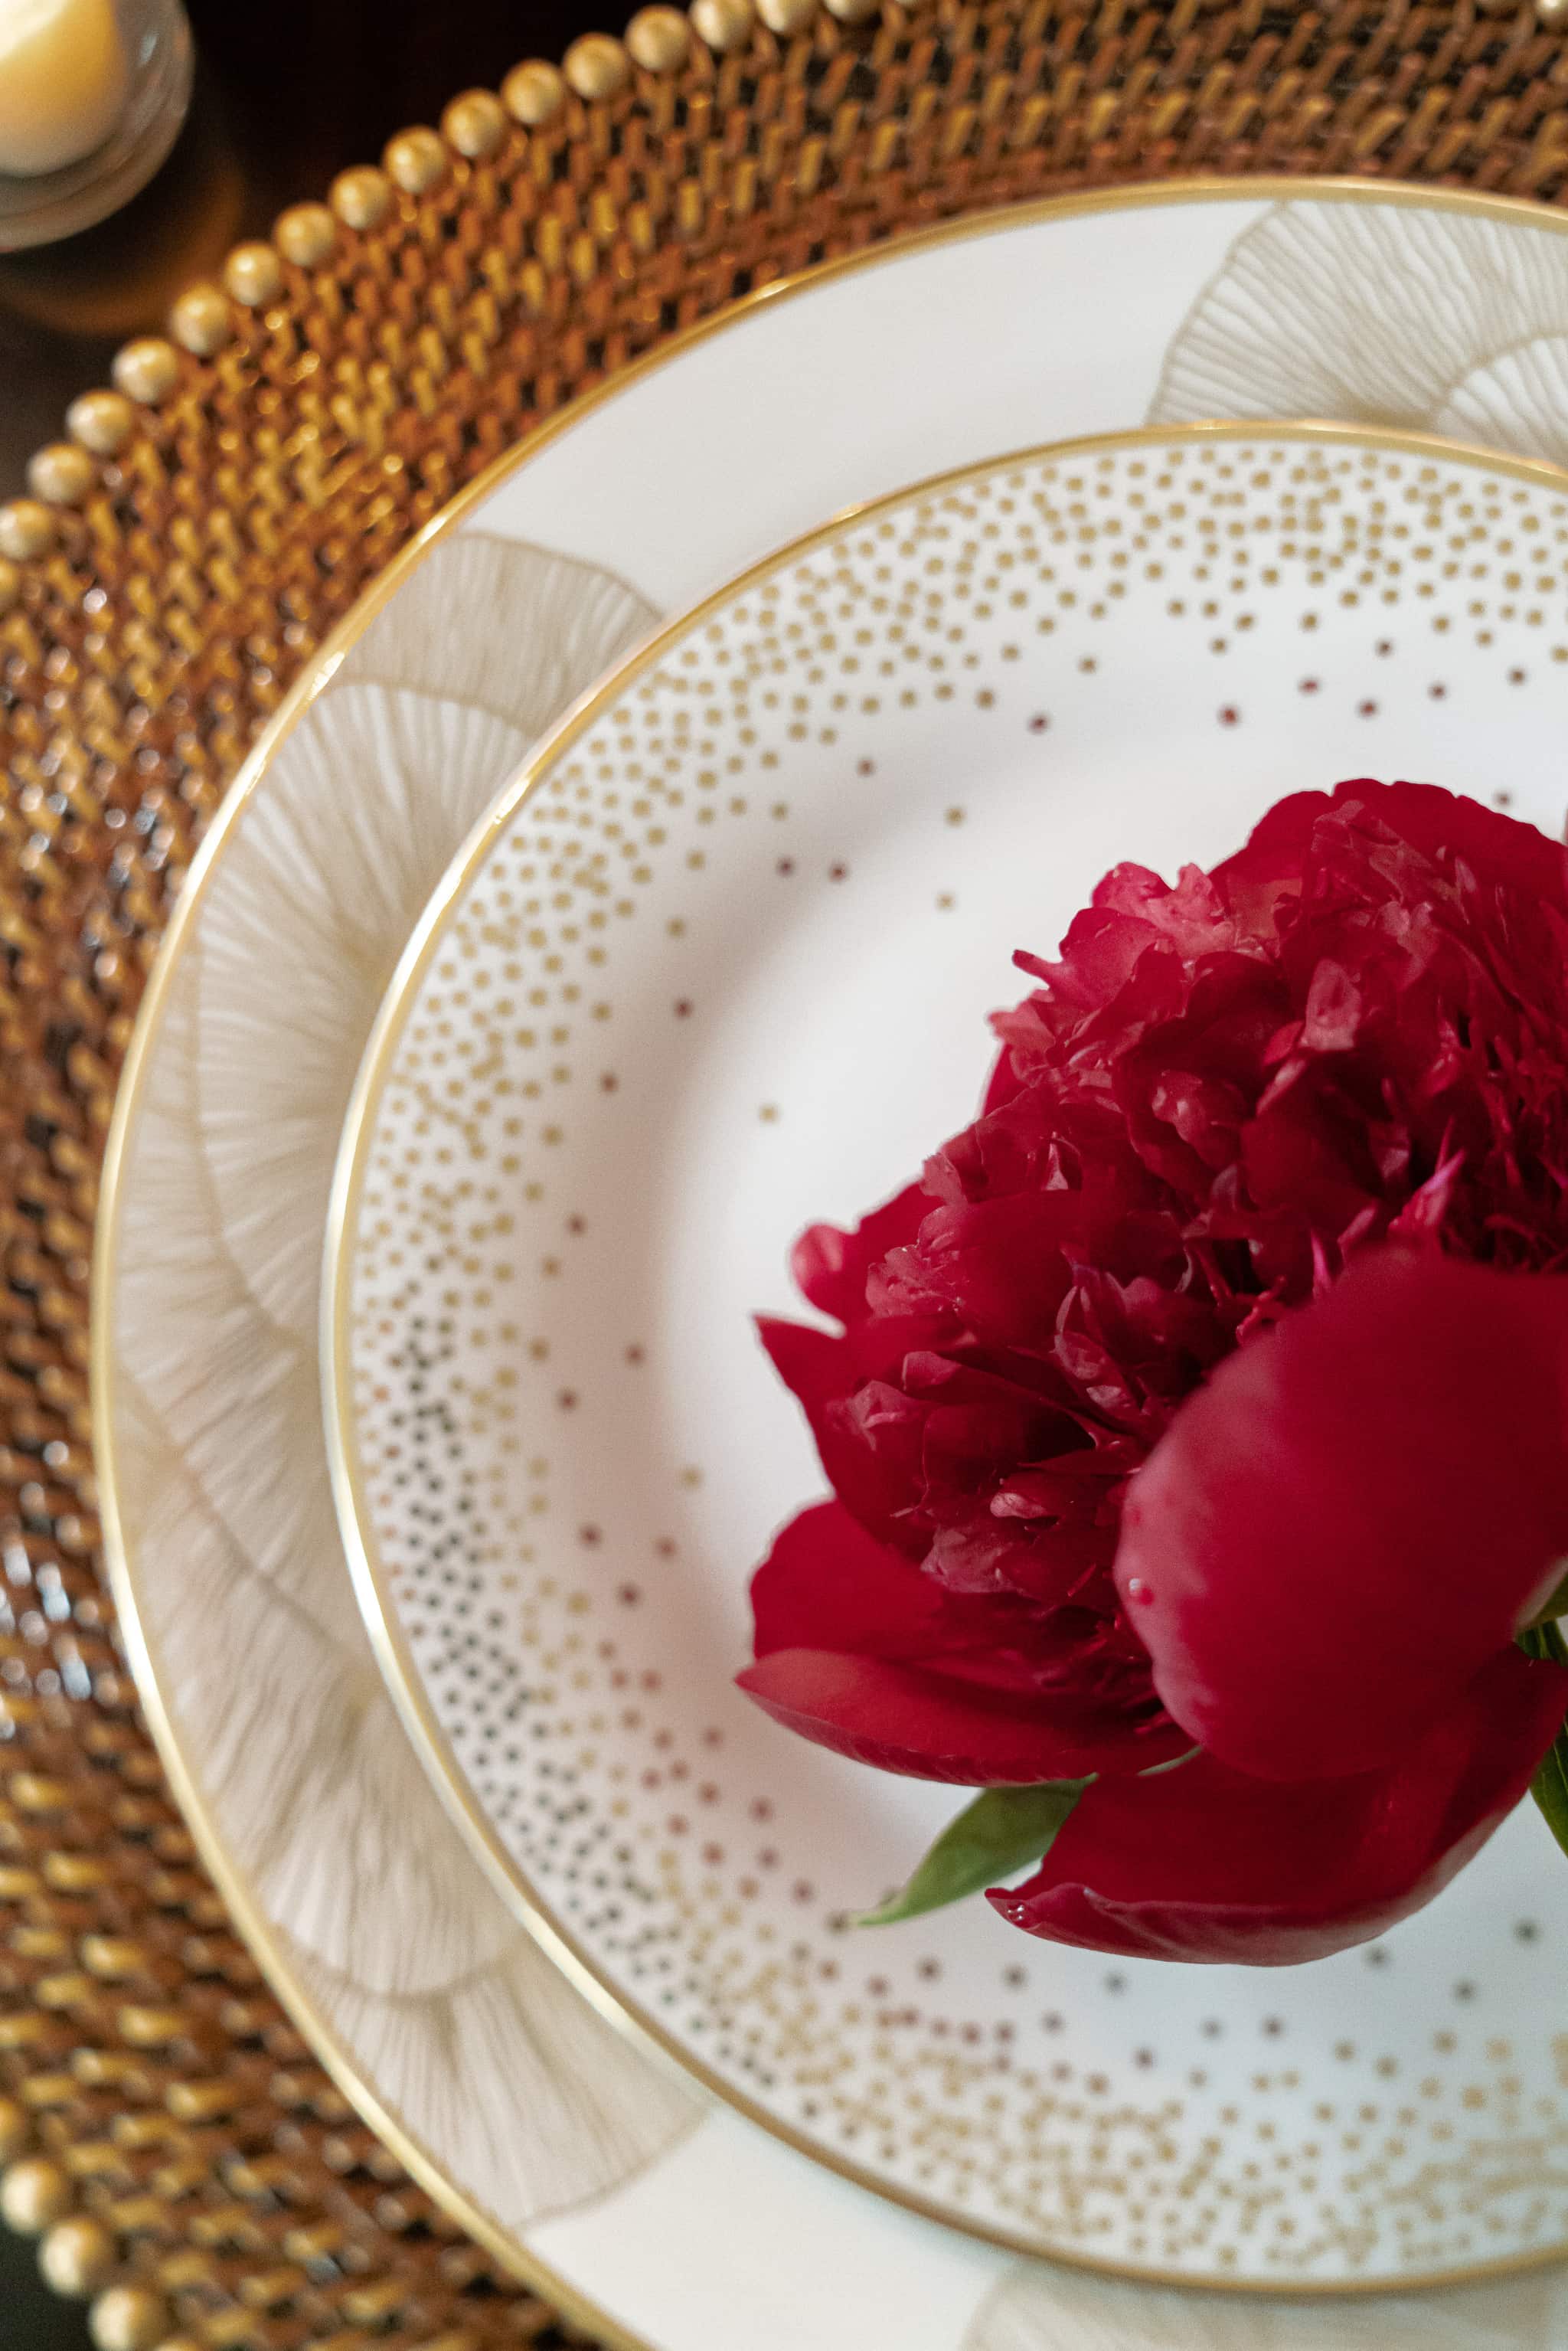 A blooming peony acts as a placecard in this elegant tablesetting by Laura U